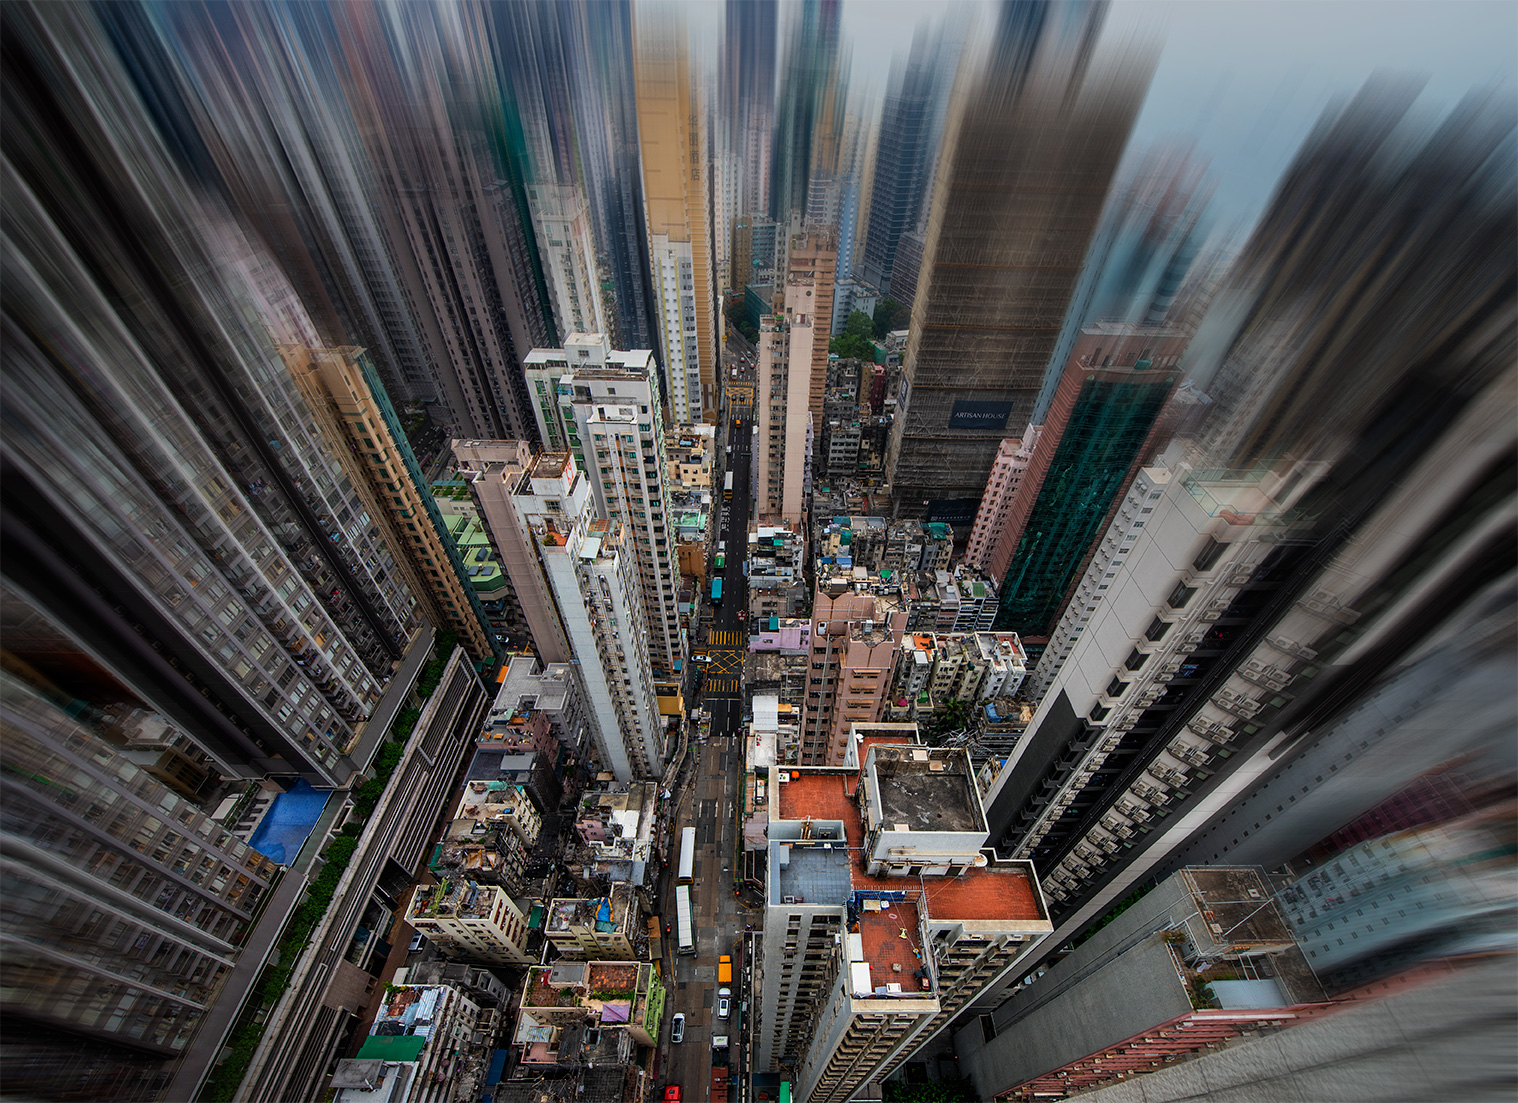 Aerial image looking down from above the heights of Hong Kong's skyscrapers